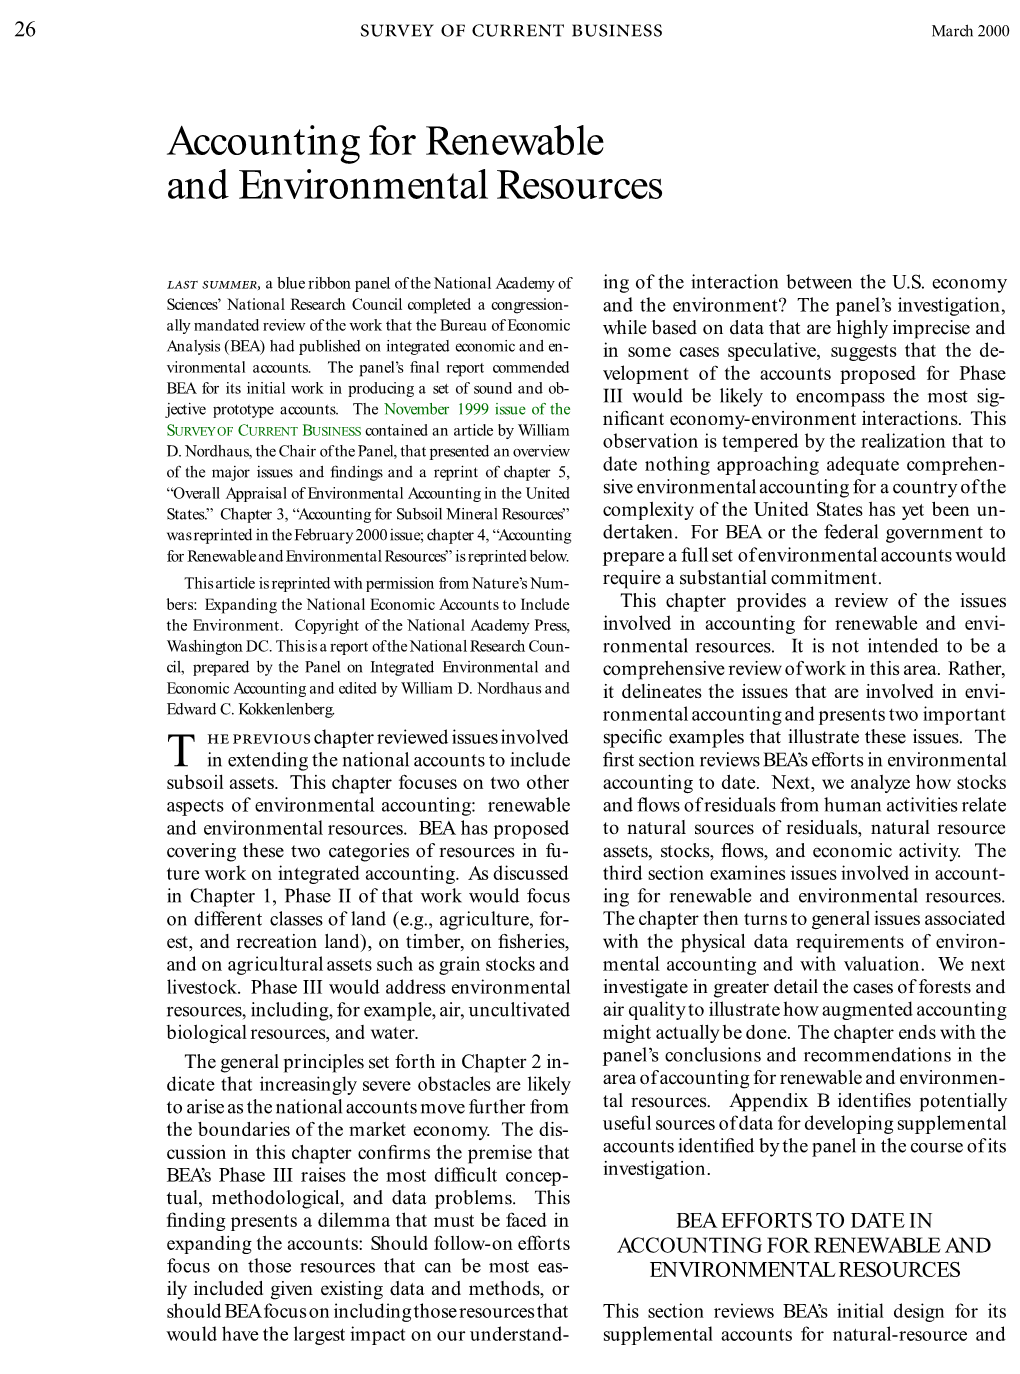 Accounting for Renewable and Environmental Resources, March 2000